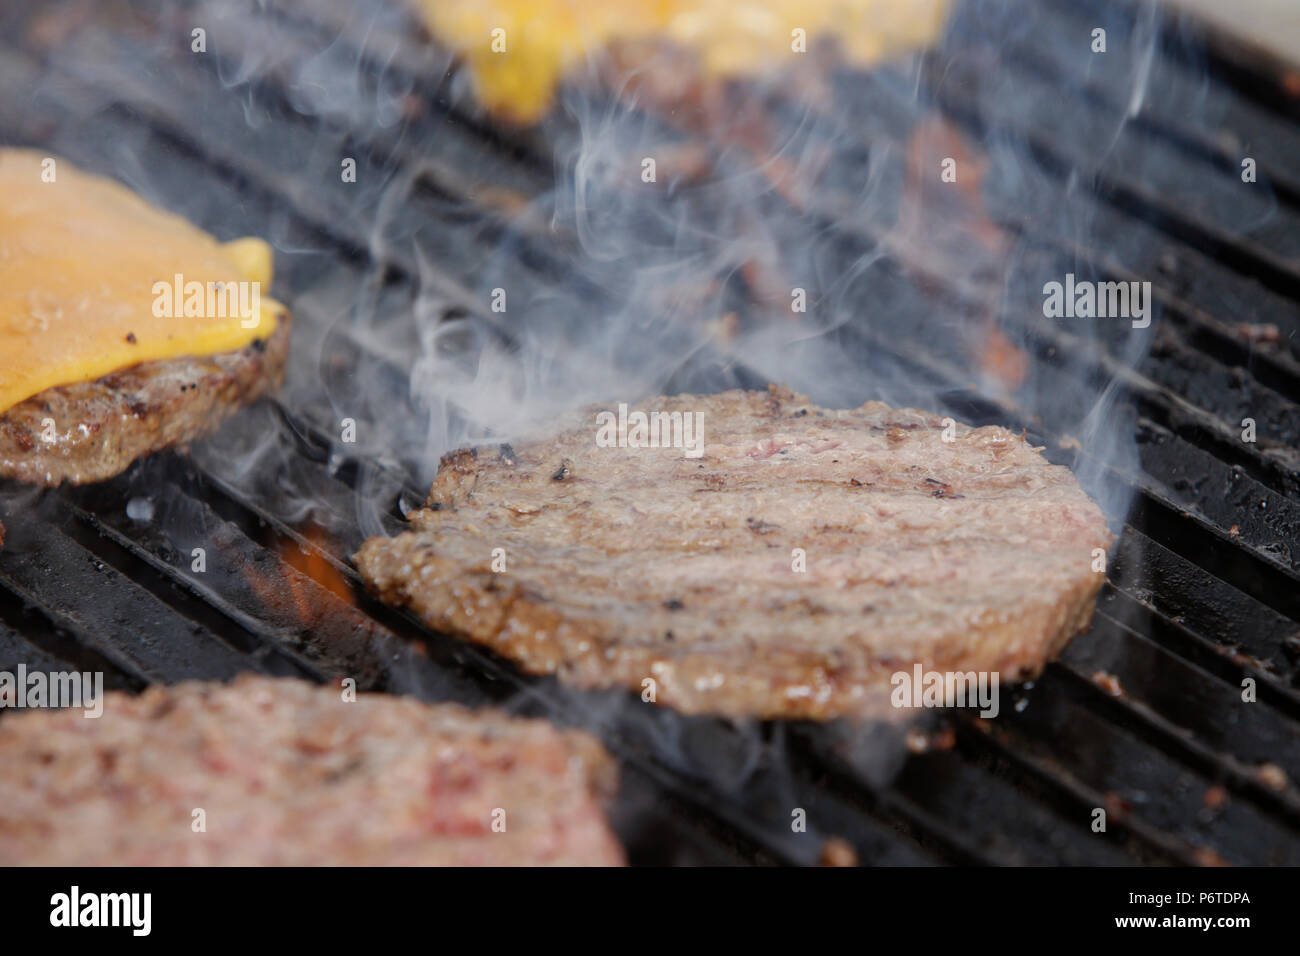 Hoppegarten, Germany, Hamburgers are cooked on a grill Stock Photo